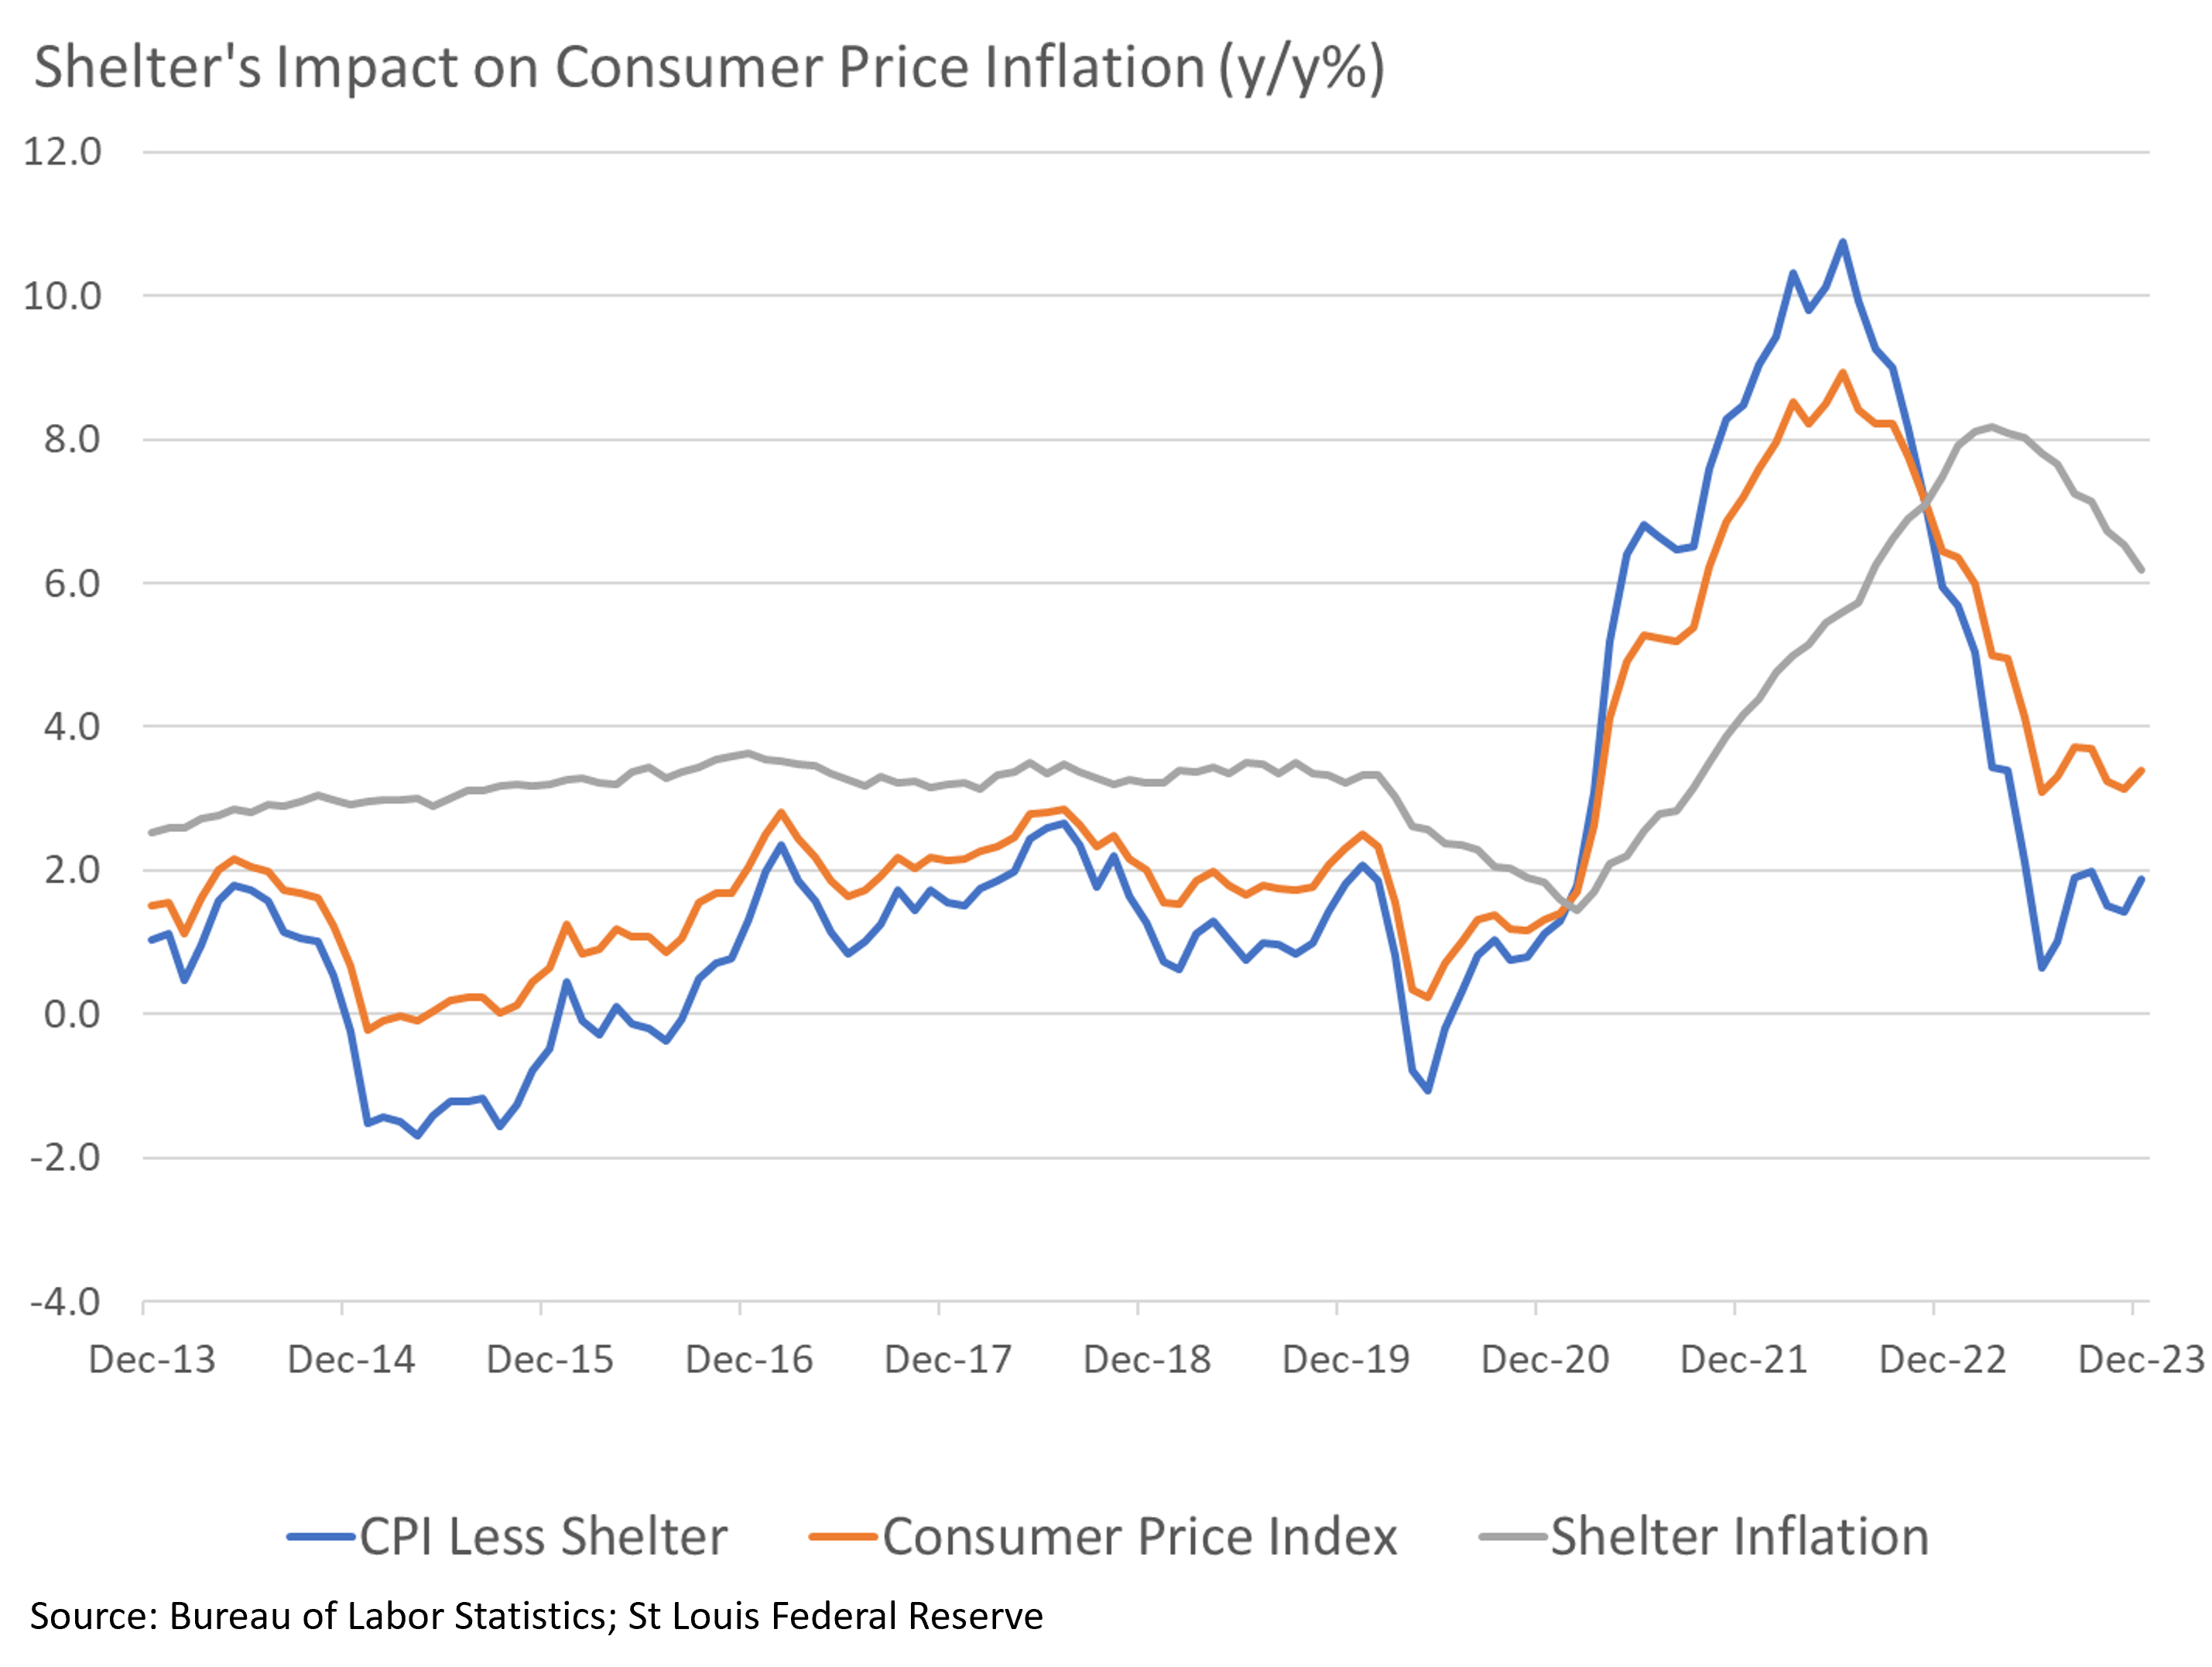 Chart showing the shelter impact on consumer price inflation